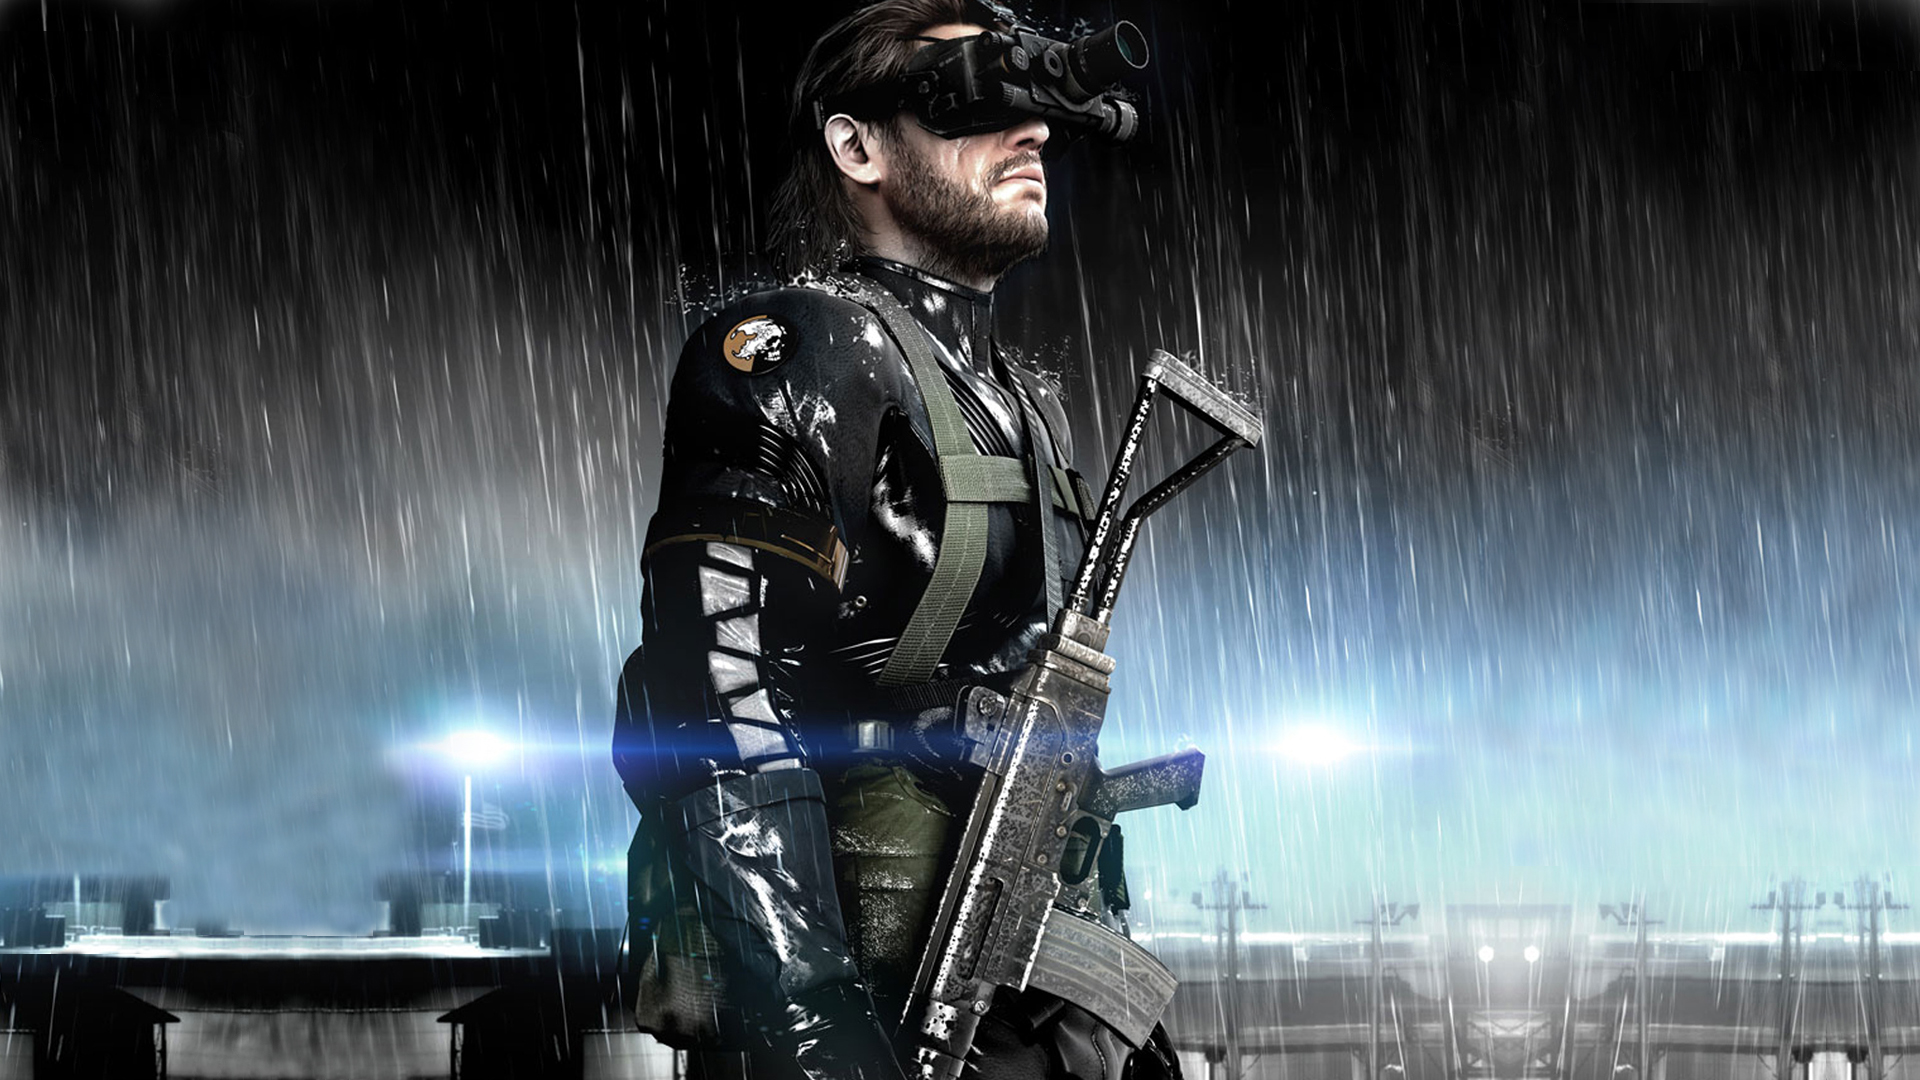 Wallpaper 1 Wallpaper From Metal Gear Solid V Ground Zeroes